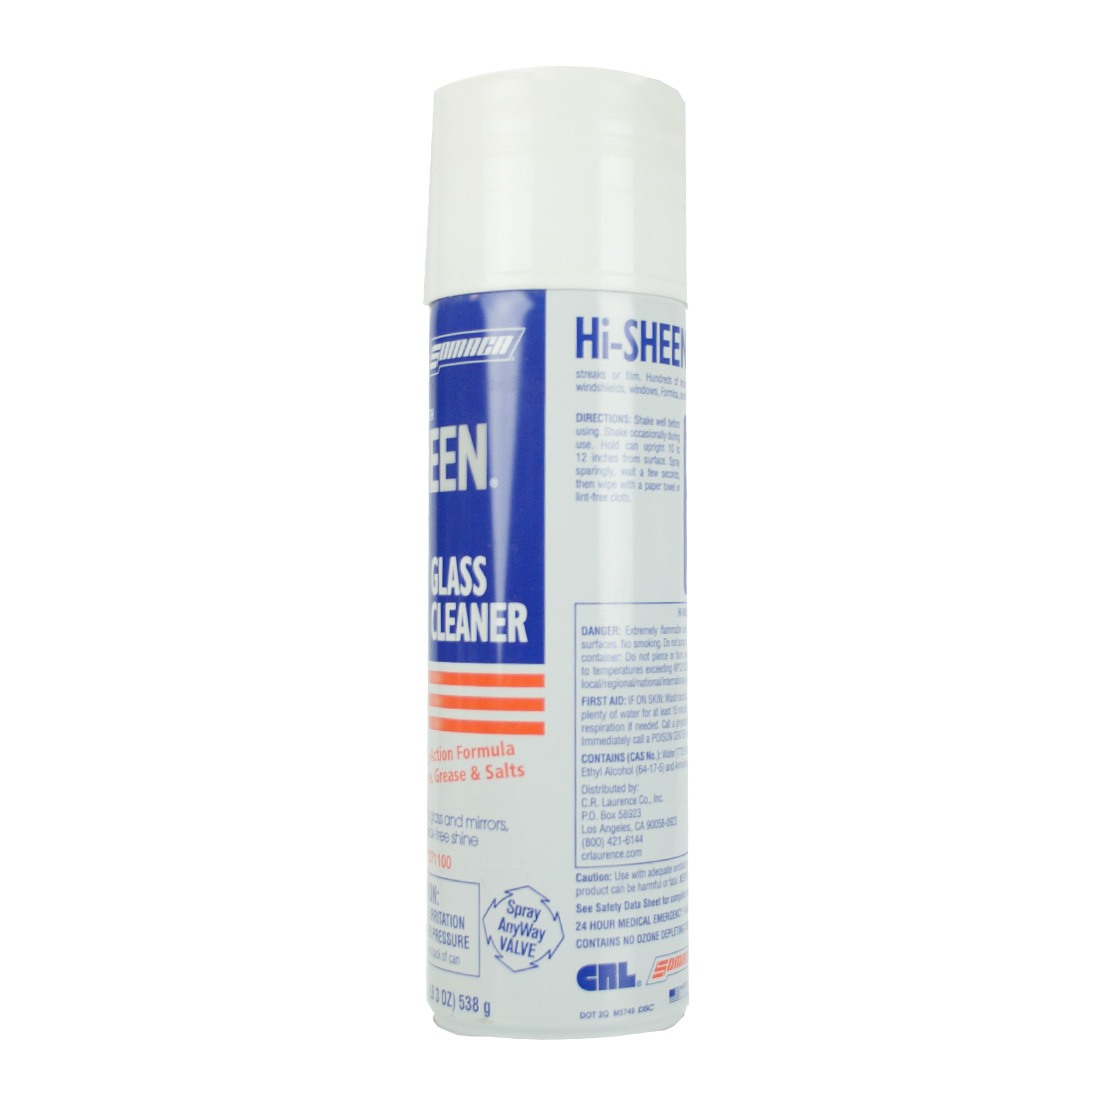 ProTool Glass Cleaner Hi Sheen 20oz Spray (84-810): Spray Cleaners